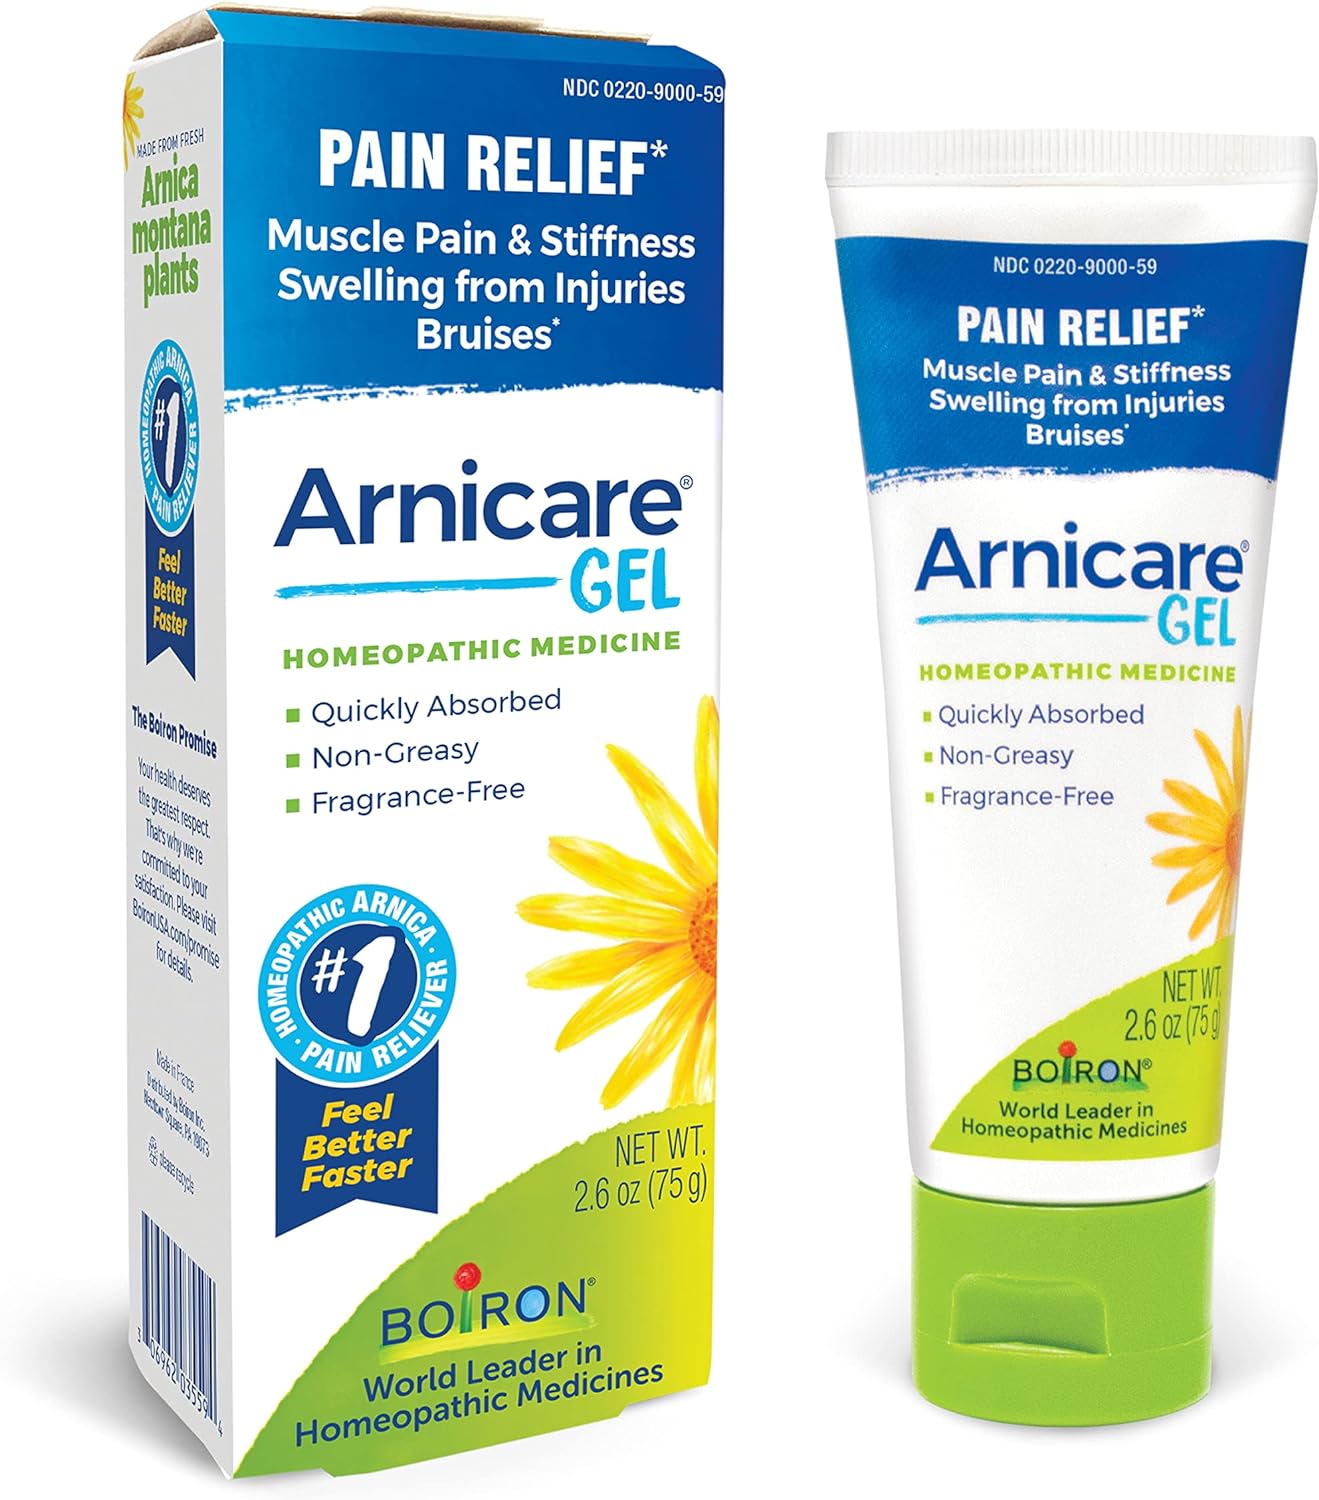 Boiron Arnicare Gel Soothing Relief of Joint Pain, Muscle Pain, Muscle Soreness, and Bruises, 2.6 oz - image 3 of 11